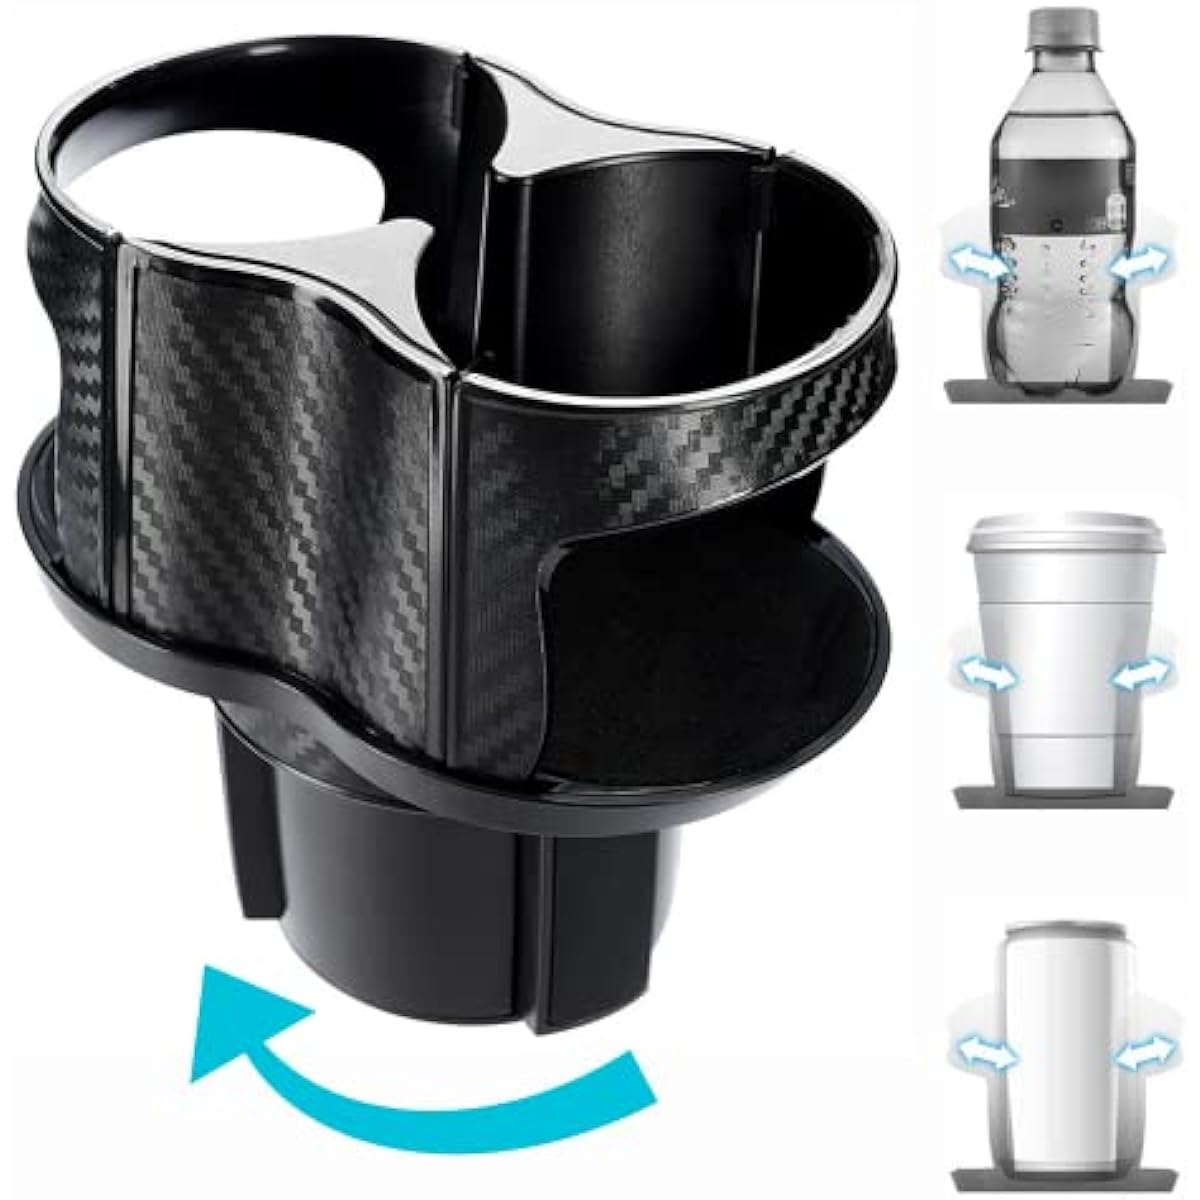 Car 2 in 1 Cup Holder Expander Adapter Multifunctional Organizer